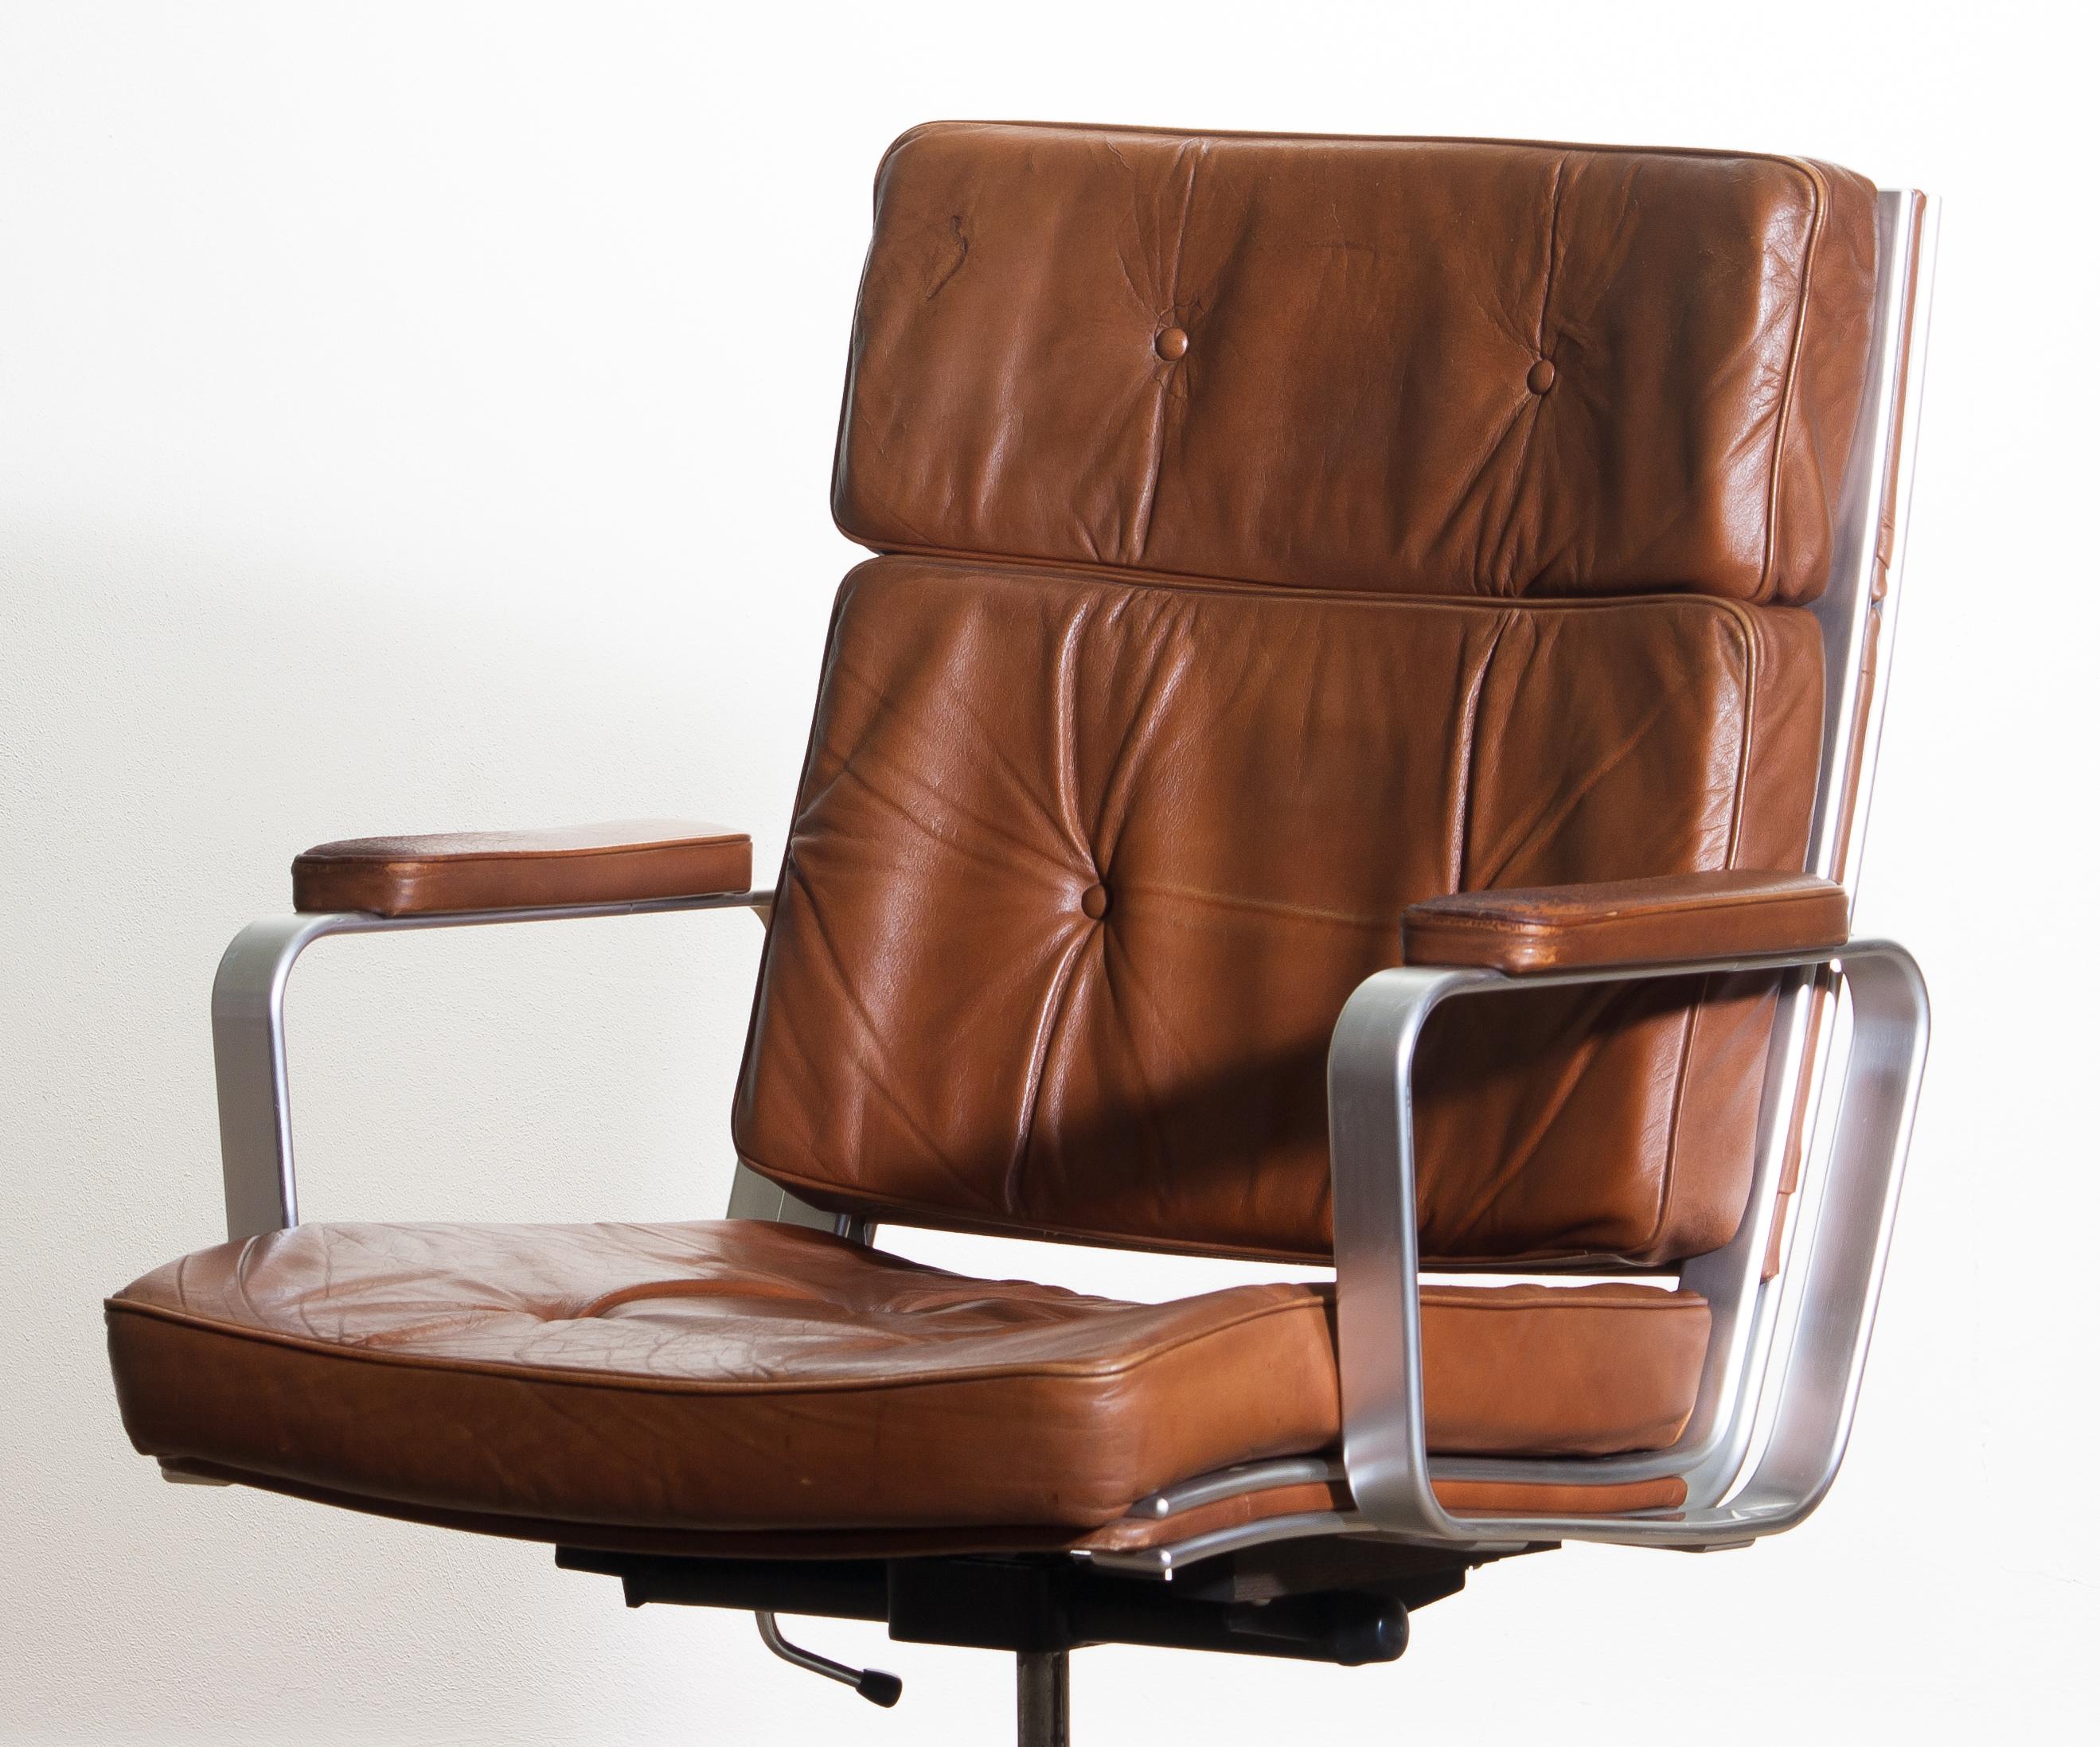 1970s, Brown Leather and Aluminum Desk Chair by Karl Erik Ekselius for Joc 2